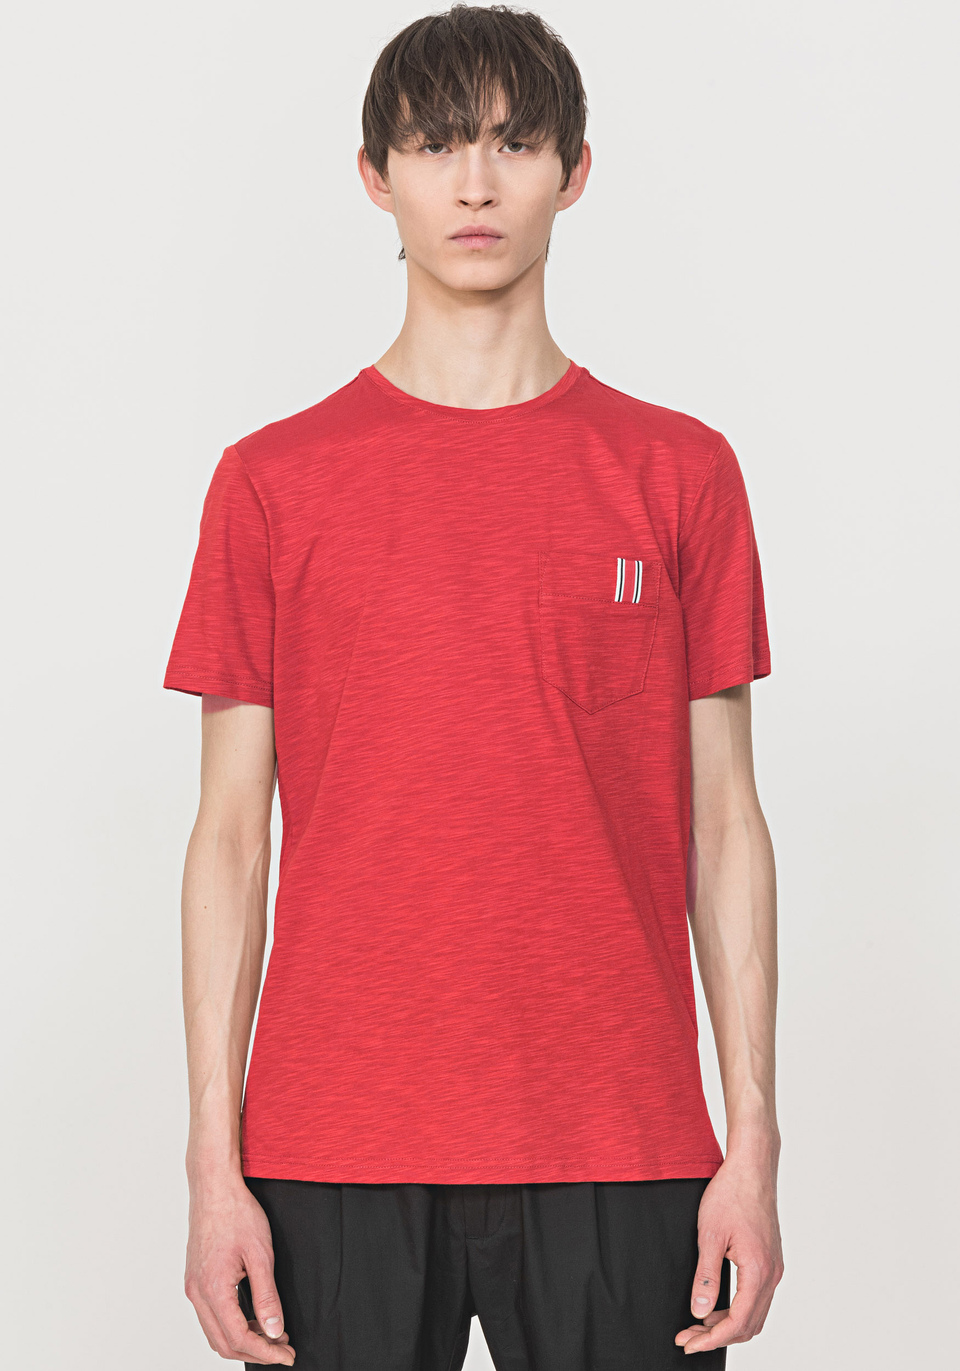 T-SHIRT IN 100% SLUB COTTON WITH BAND DETAIL ON POCKET - Antony Morato Online Shop